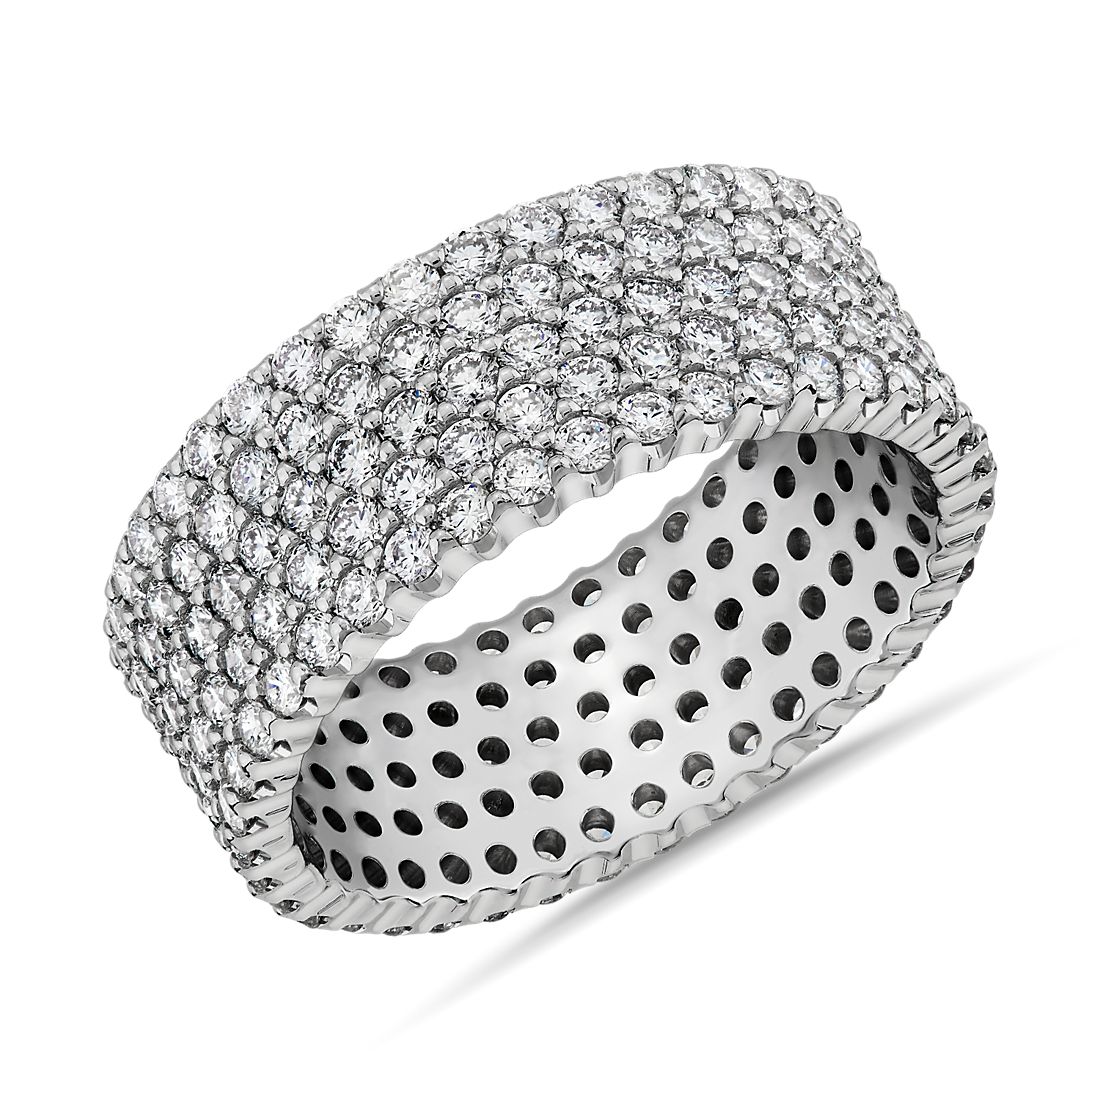 Women's Stainless Steel Pave Setting CZ Eternity Wedding Band Ring Size 5-10